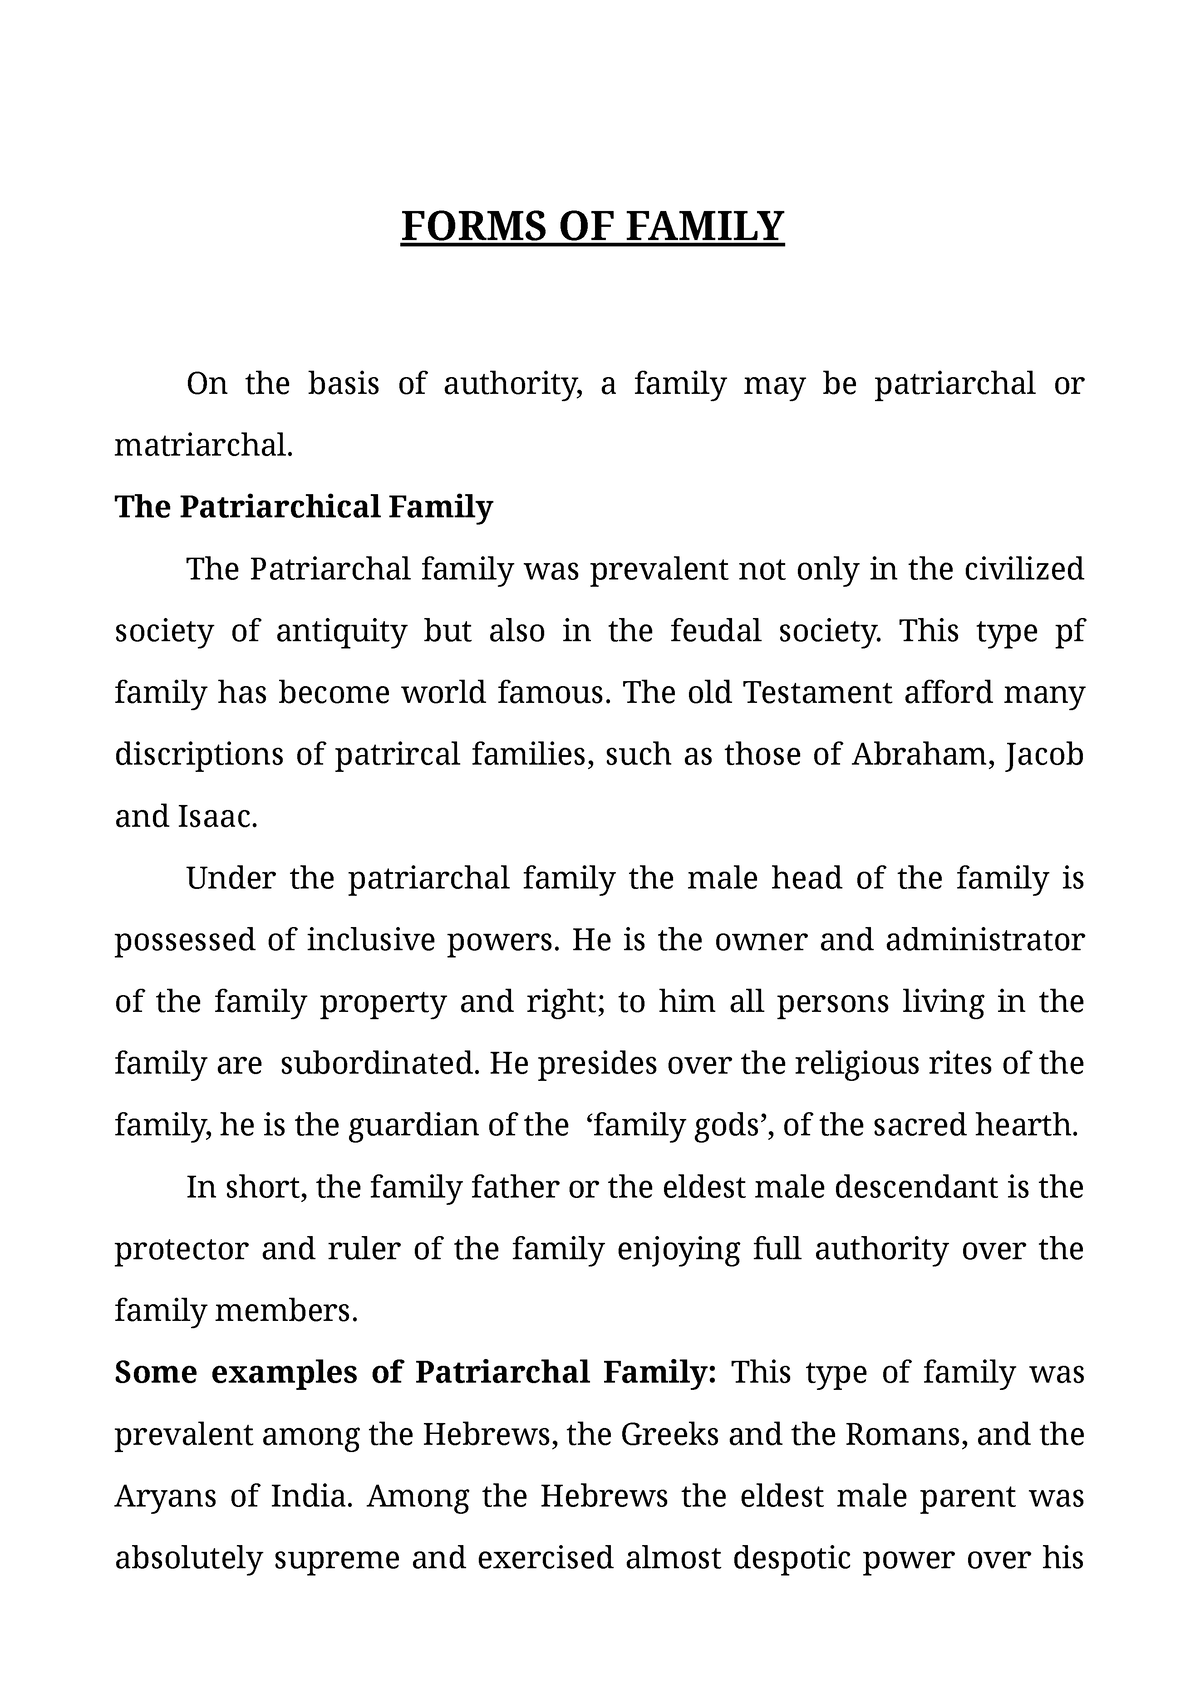 Family FORMS OF FAMILY On The Basis Of Authority A Family May Be 